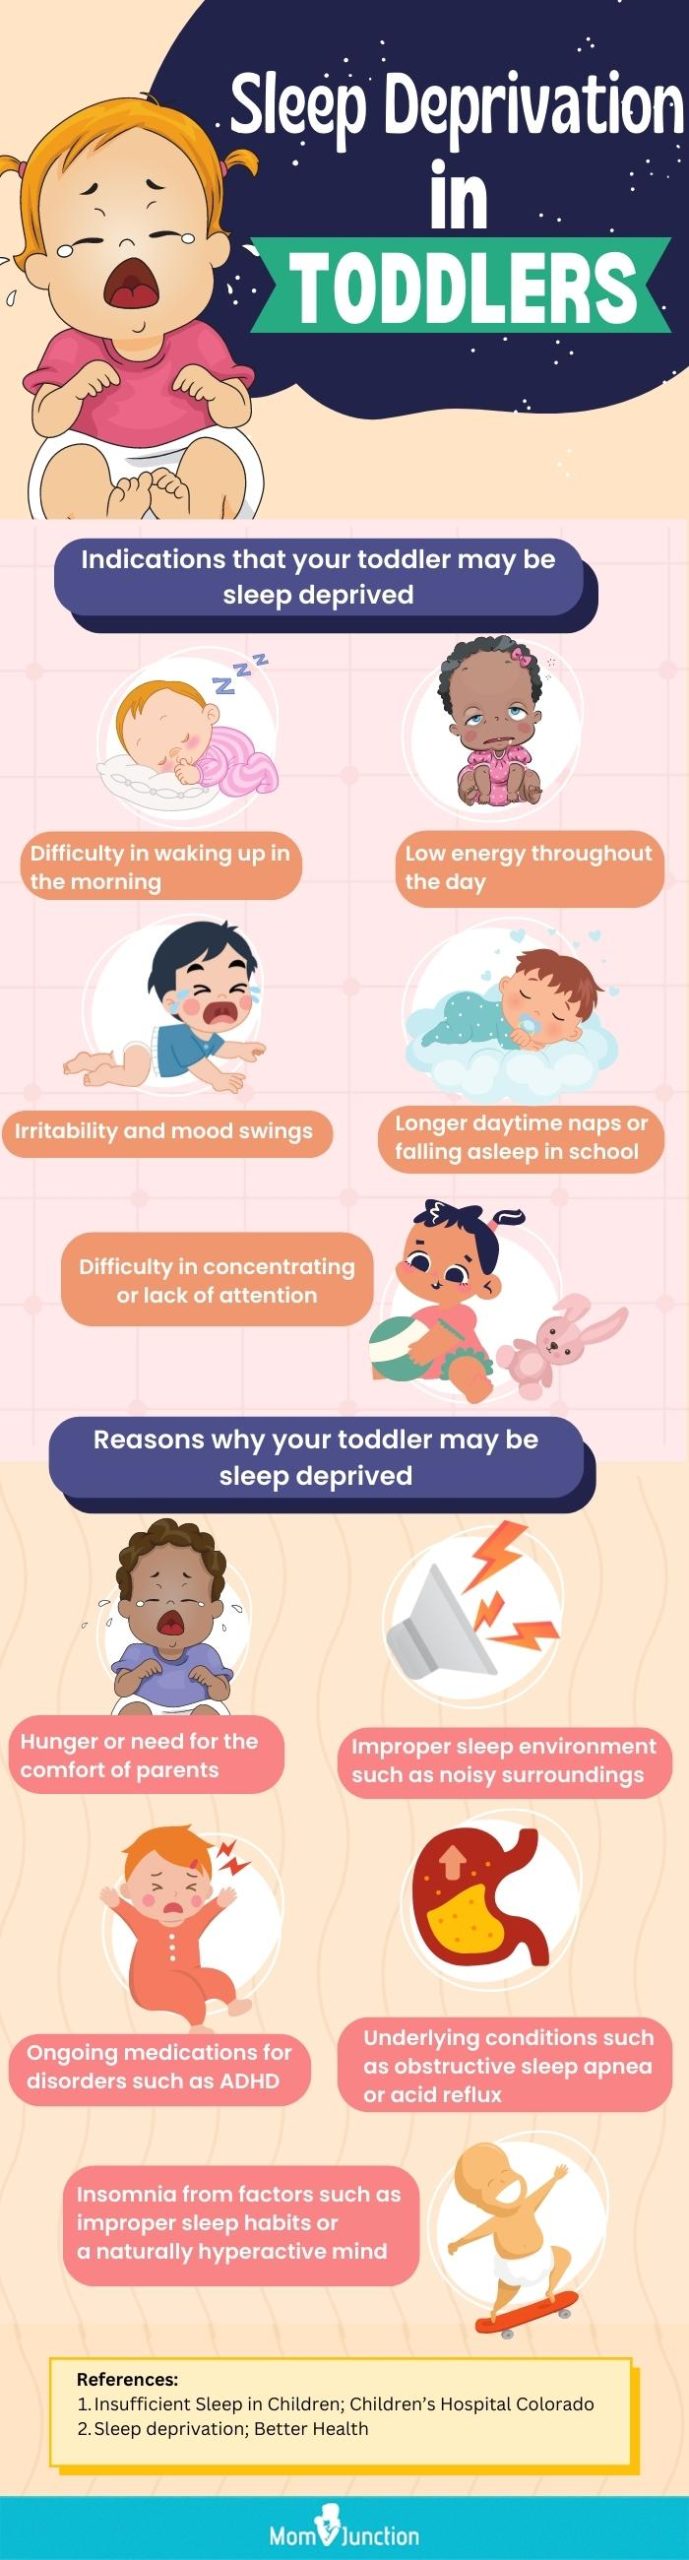 sleep deprivation in toddlers (infographic)